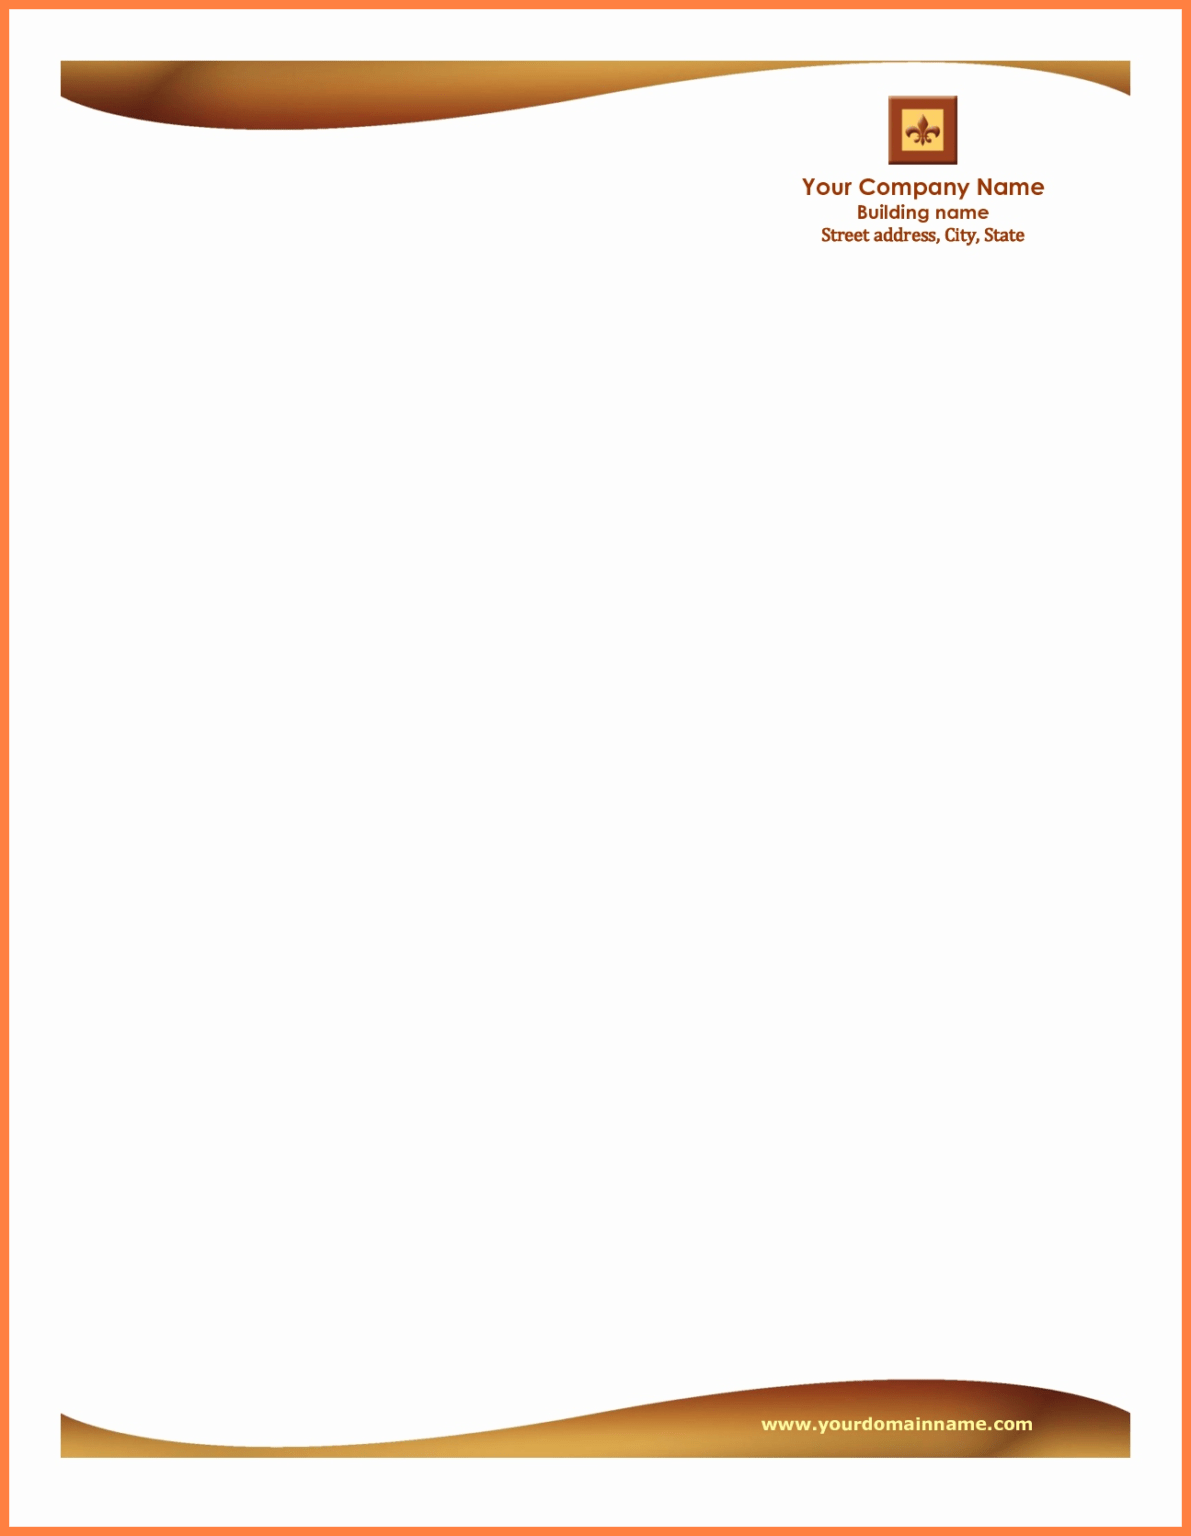 Letterhead Template Microsoft Word Letterhead Templates Images And 